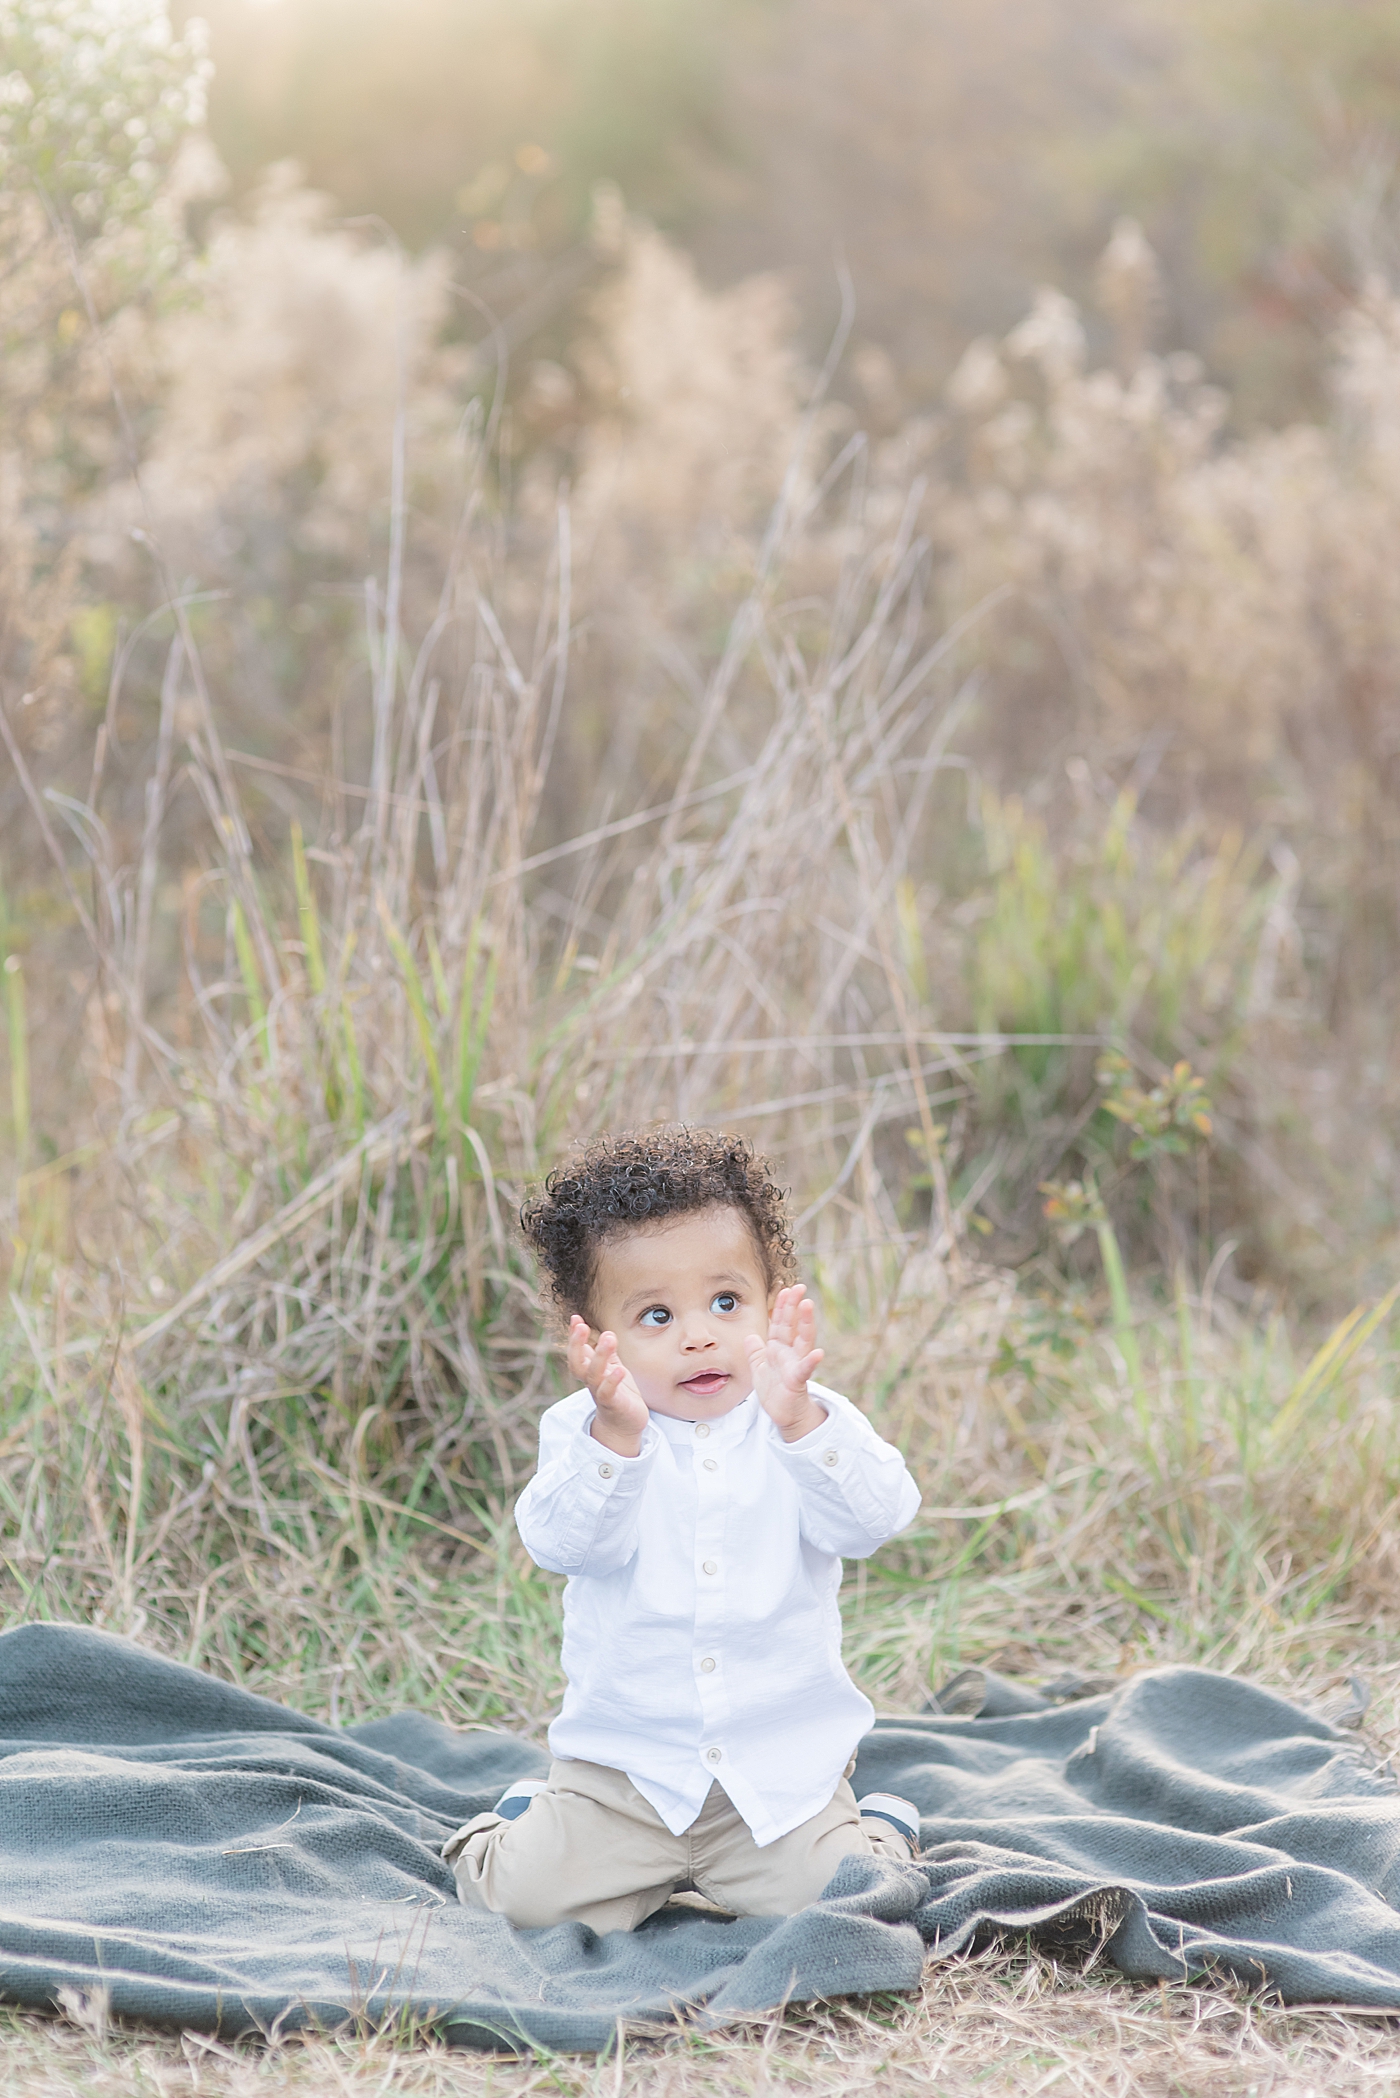 Baby boy clapping his hands | Photo by Anna Wisjo Photography